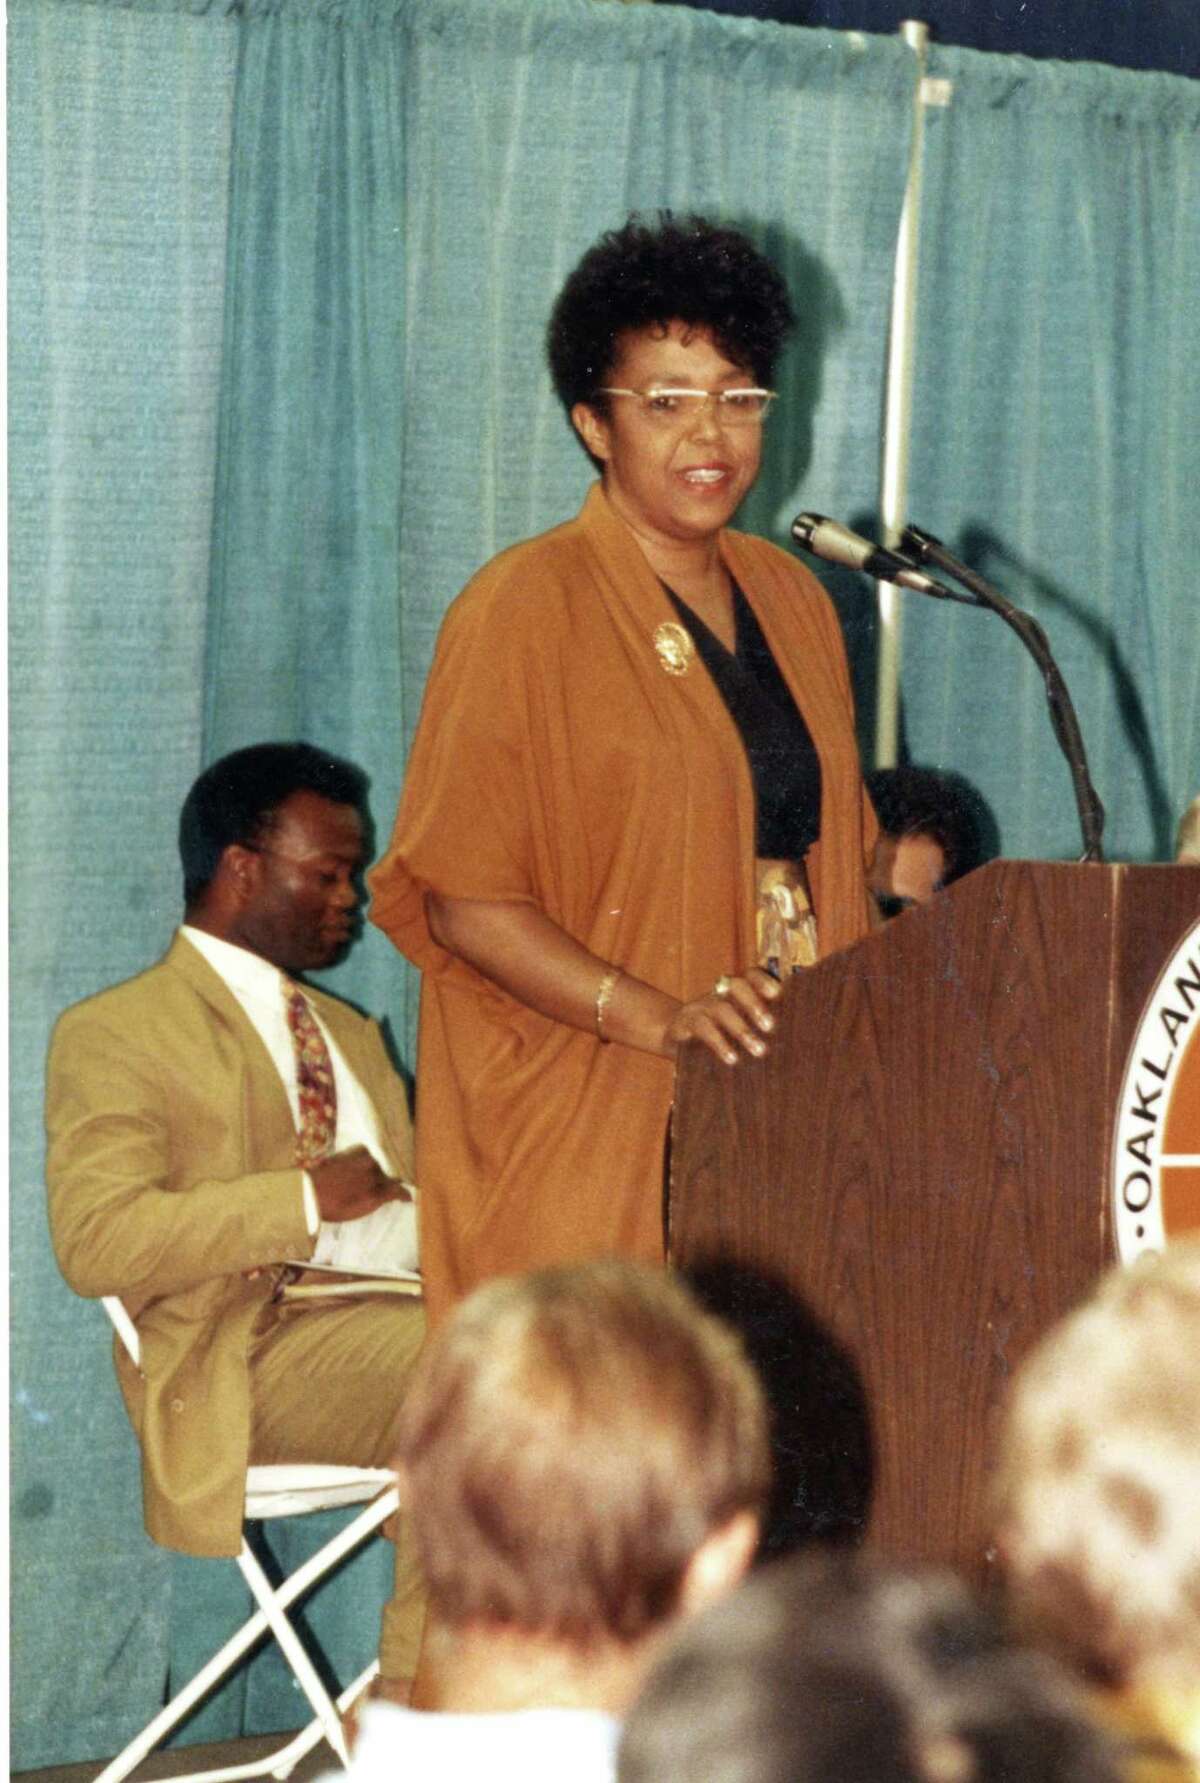 Sharon Jones speaks at a conference held at the Oakland Coliseum. Date unknown.